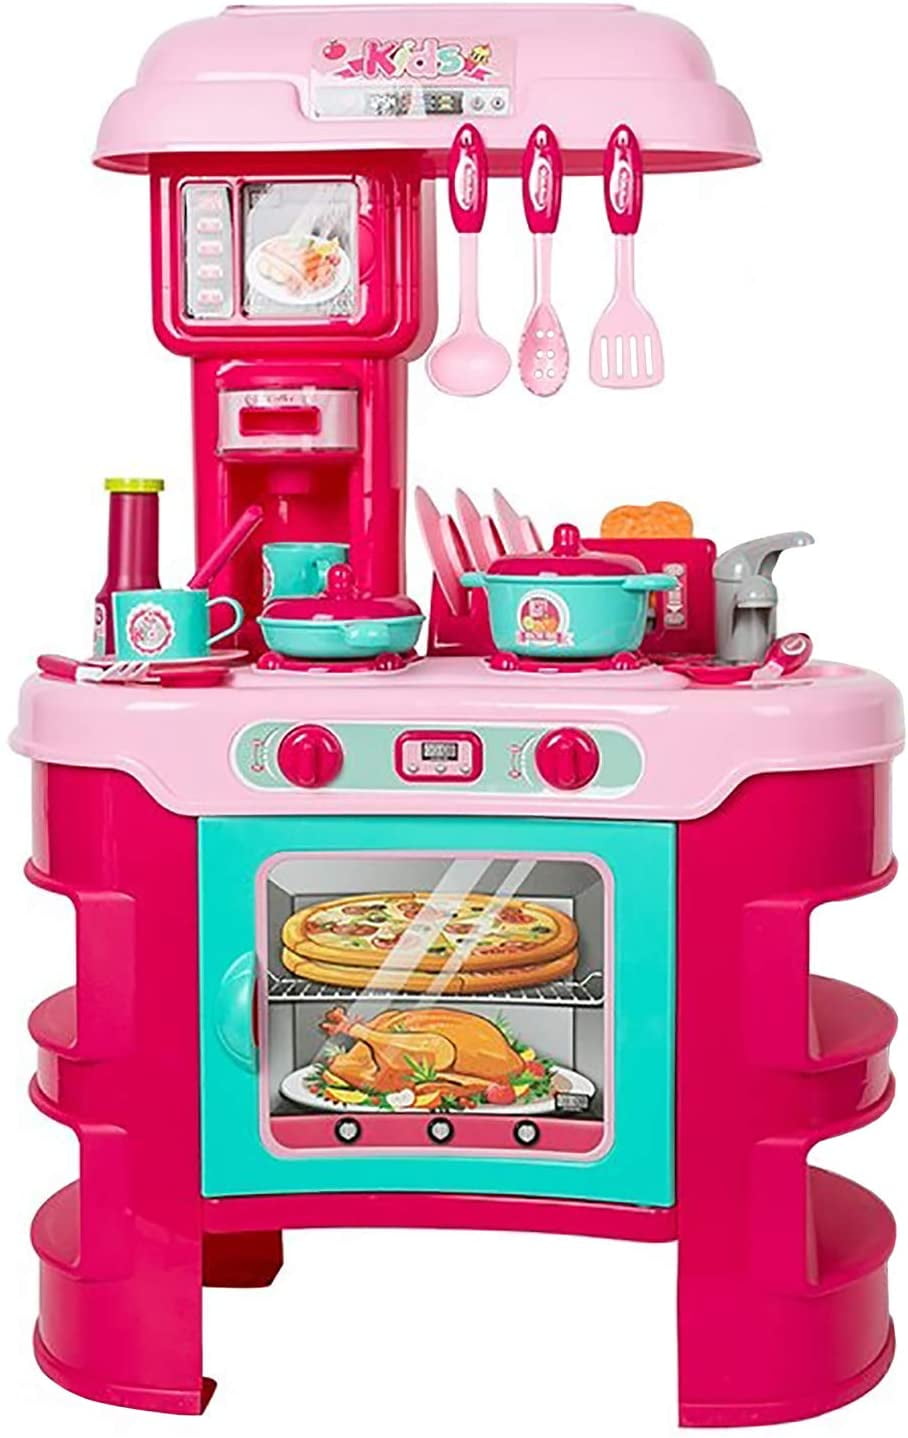 Disney Minnie Mouse Flipping Fun Kitchen PINK Girls Play Cook Food Sound NEW !! 